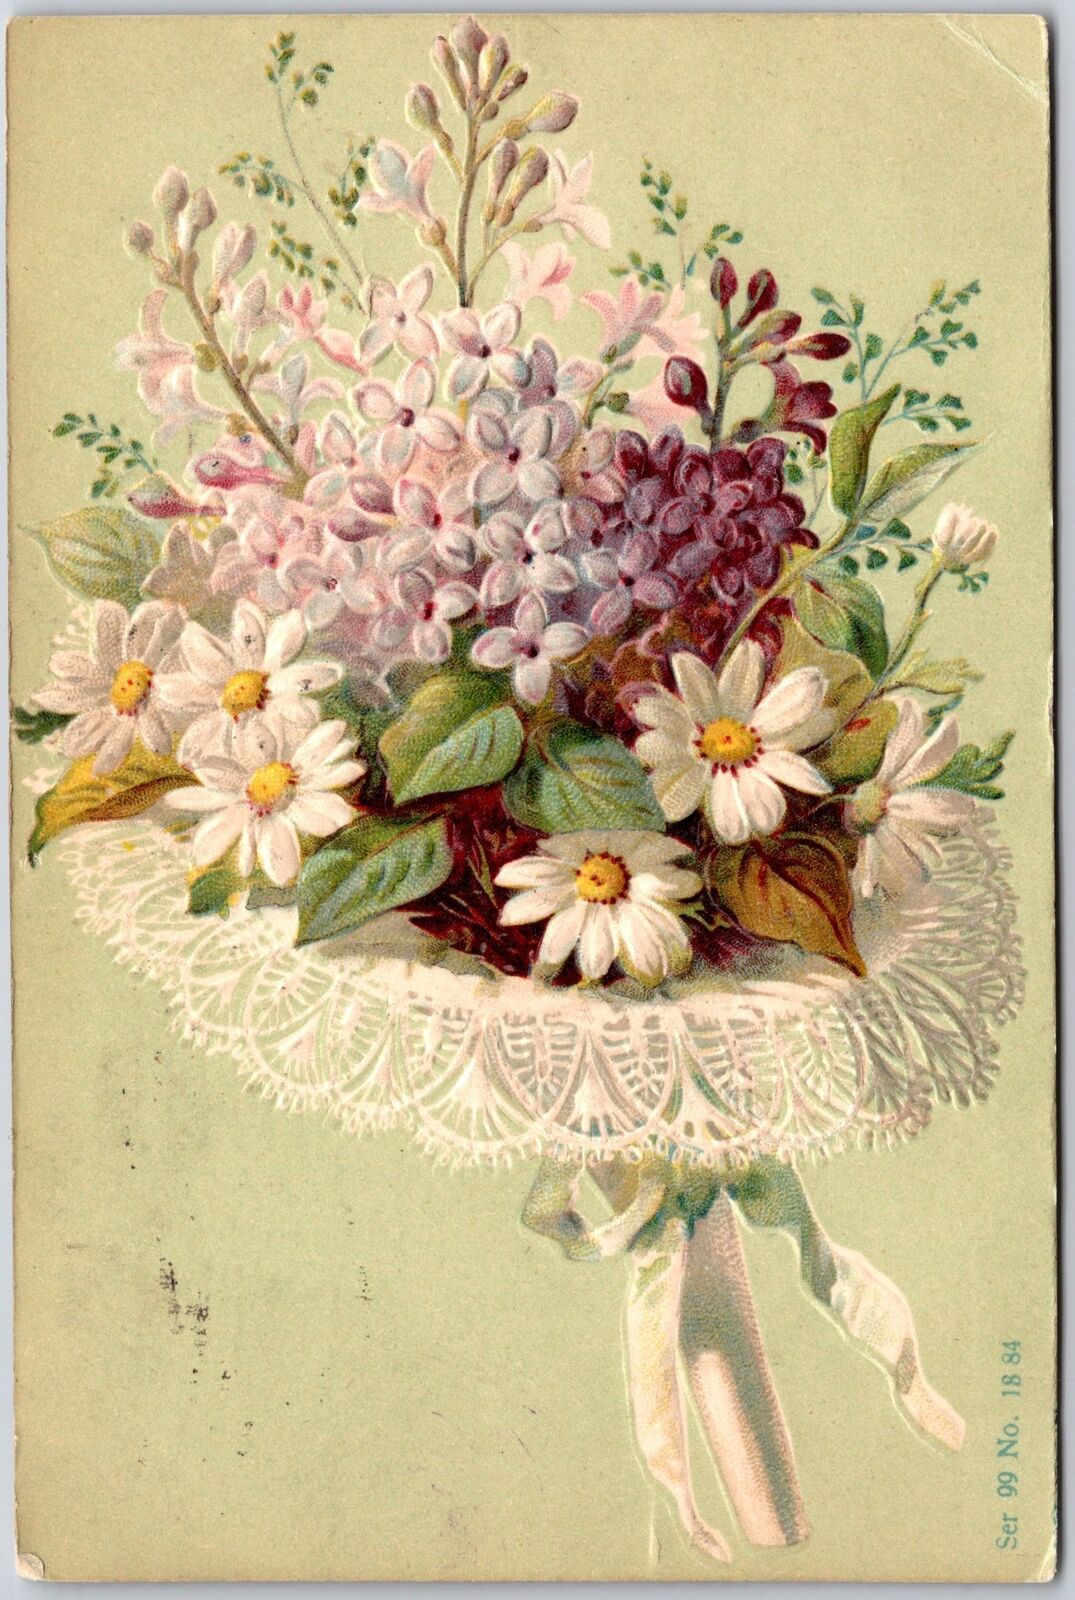 1908 Beautiful White Flower Bouquet Greetings & Wishes Posted Postcard